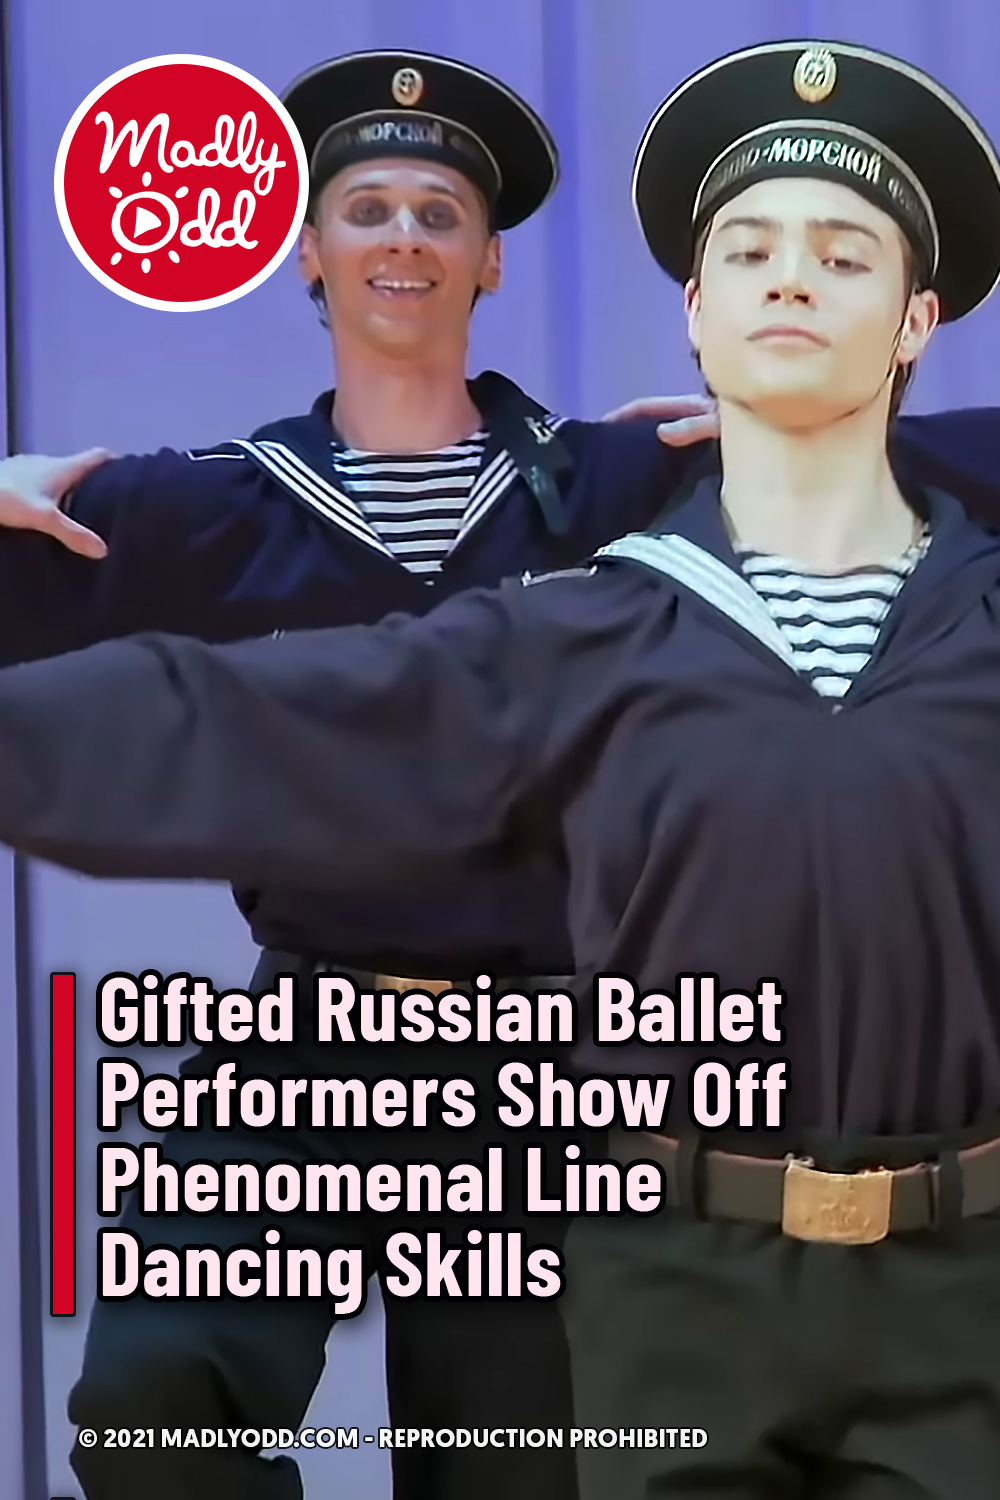 Gifted Russian Ballet Performers Show Off Phenomenal Line Dancing Skills